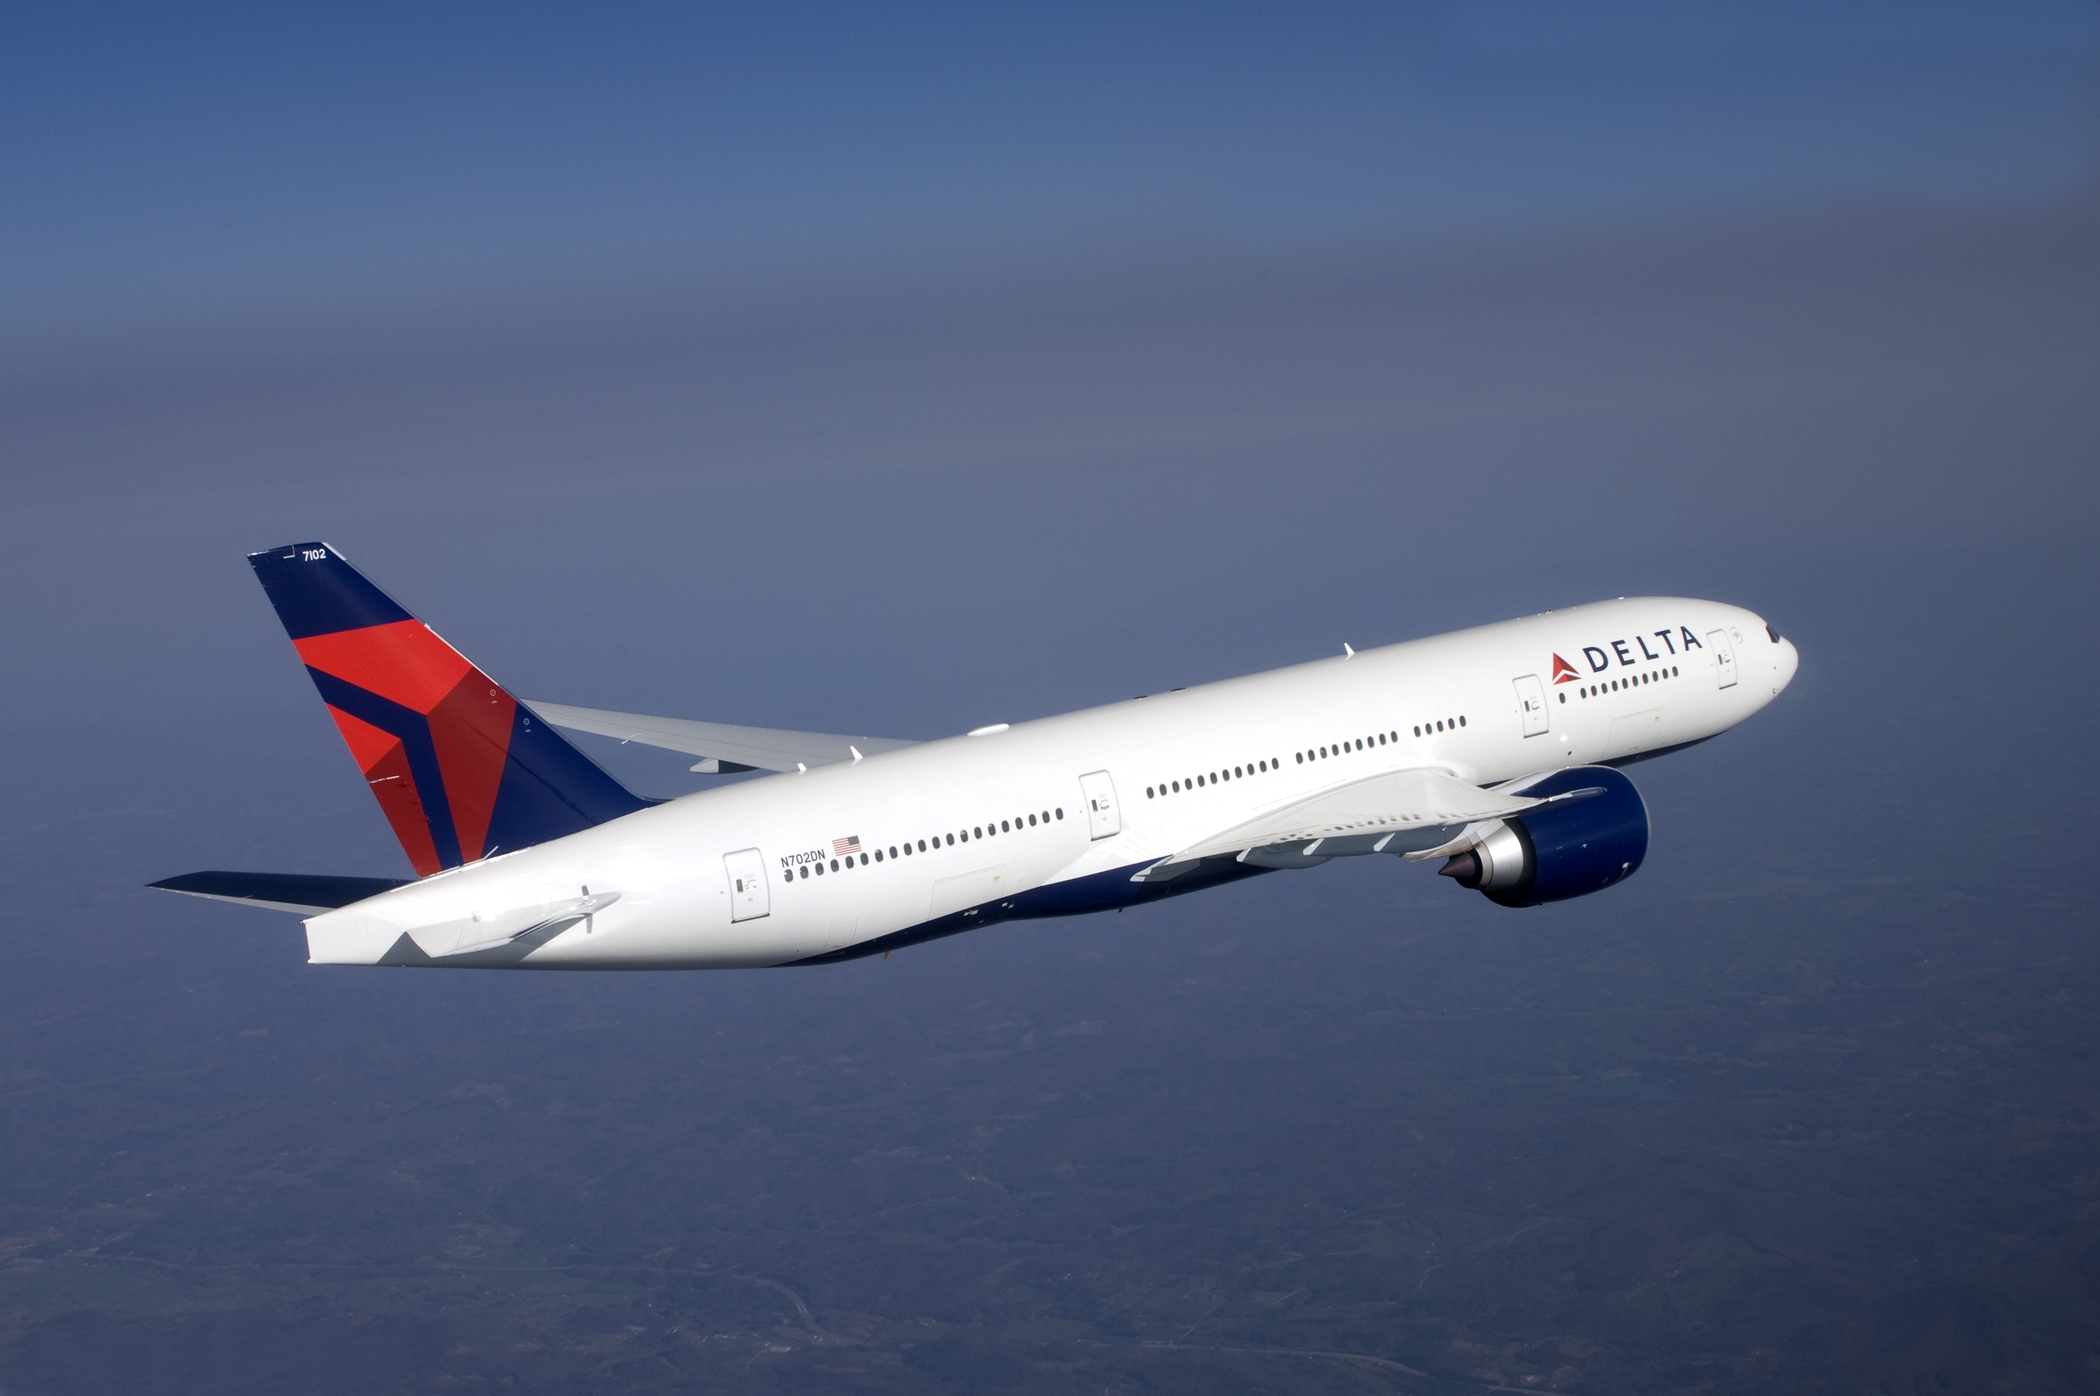 Delta's 777 aircraft to retire by end of 2020, simplifying widebody fleet  amid COVID-19 | Delta News Hub